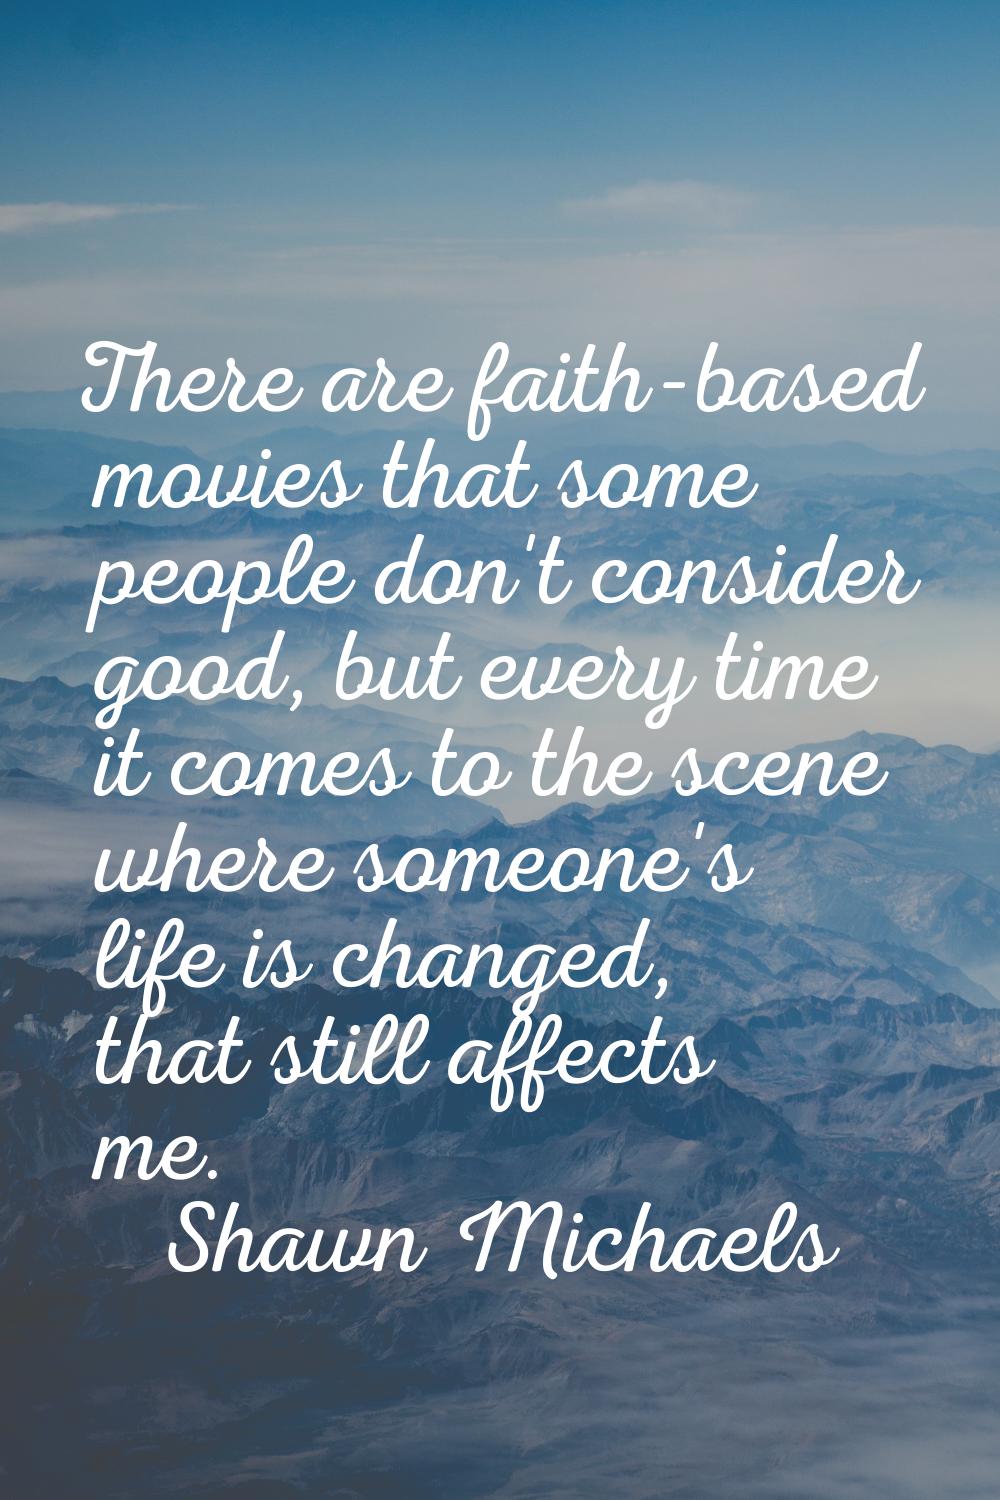 There are faith-based movies that some people don't consider good, but every time it comes to the s